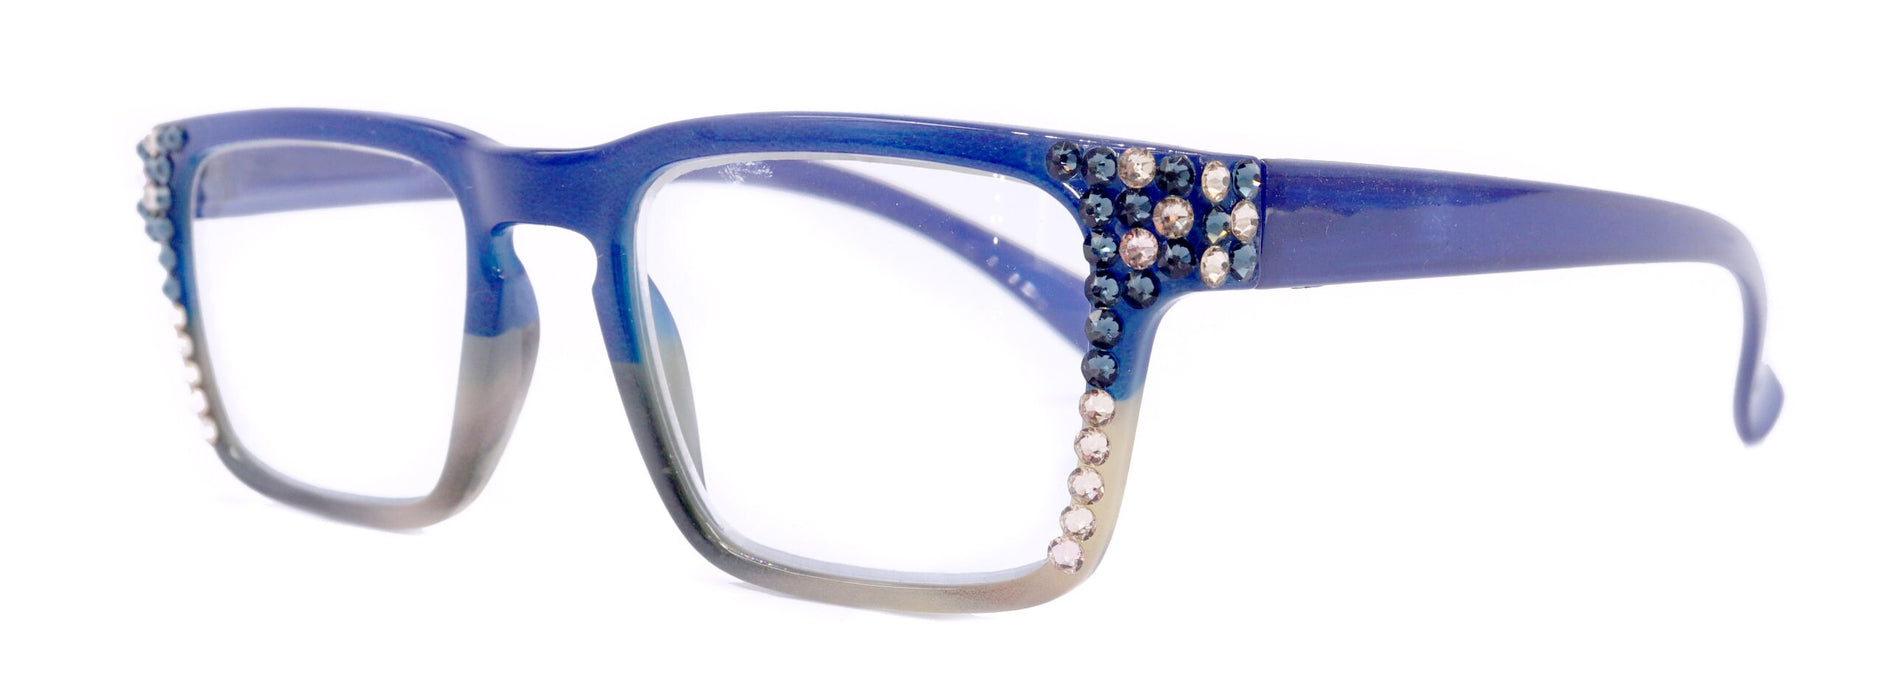 Piper, (Bling) ReadingGlasses for Women W (Montana, L. Colorado)Genuine European Crystals.(Square)(Blue Brown Faded Stripes) NY Fifth Avenue